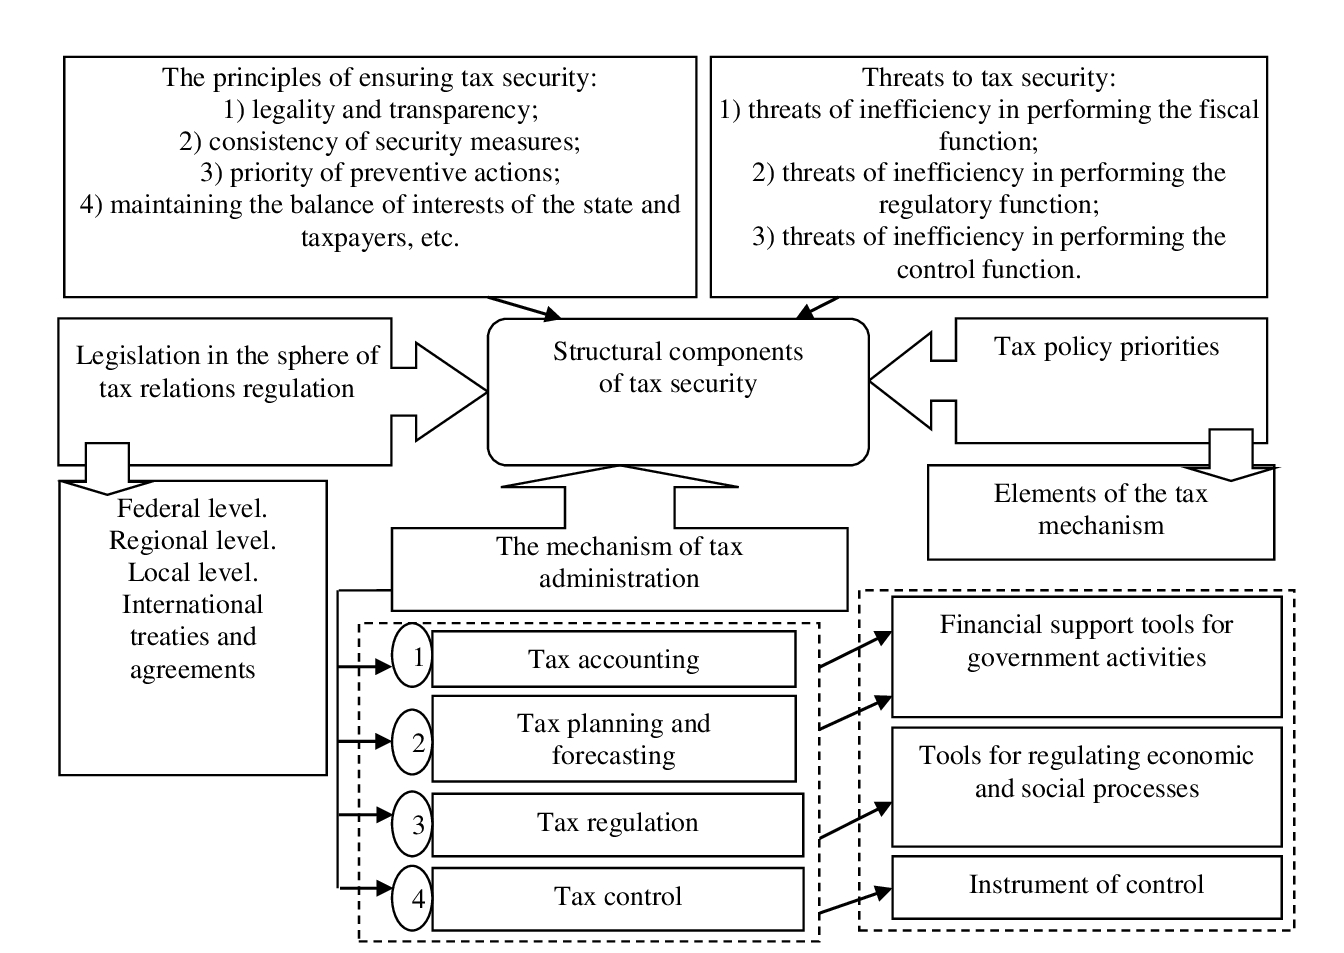 Structural components of tax security